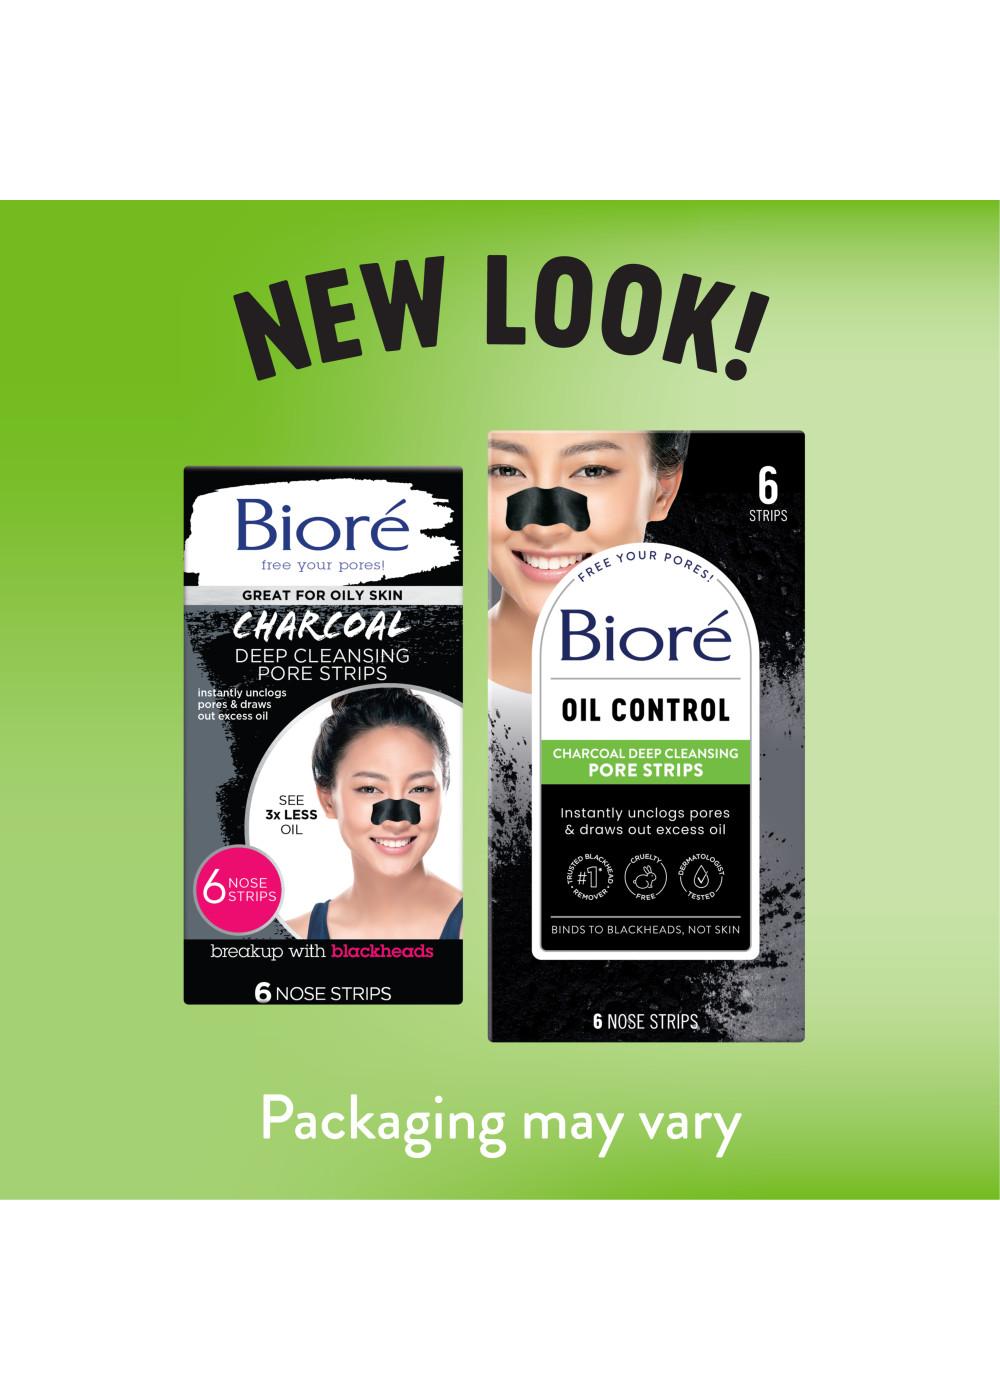 Bioré Oil Control Charcoal Deep Cleansing Pore Strips; image 2 of 11